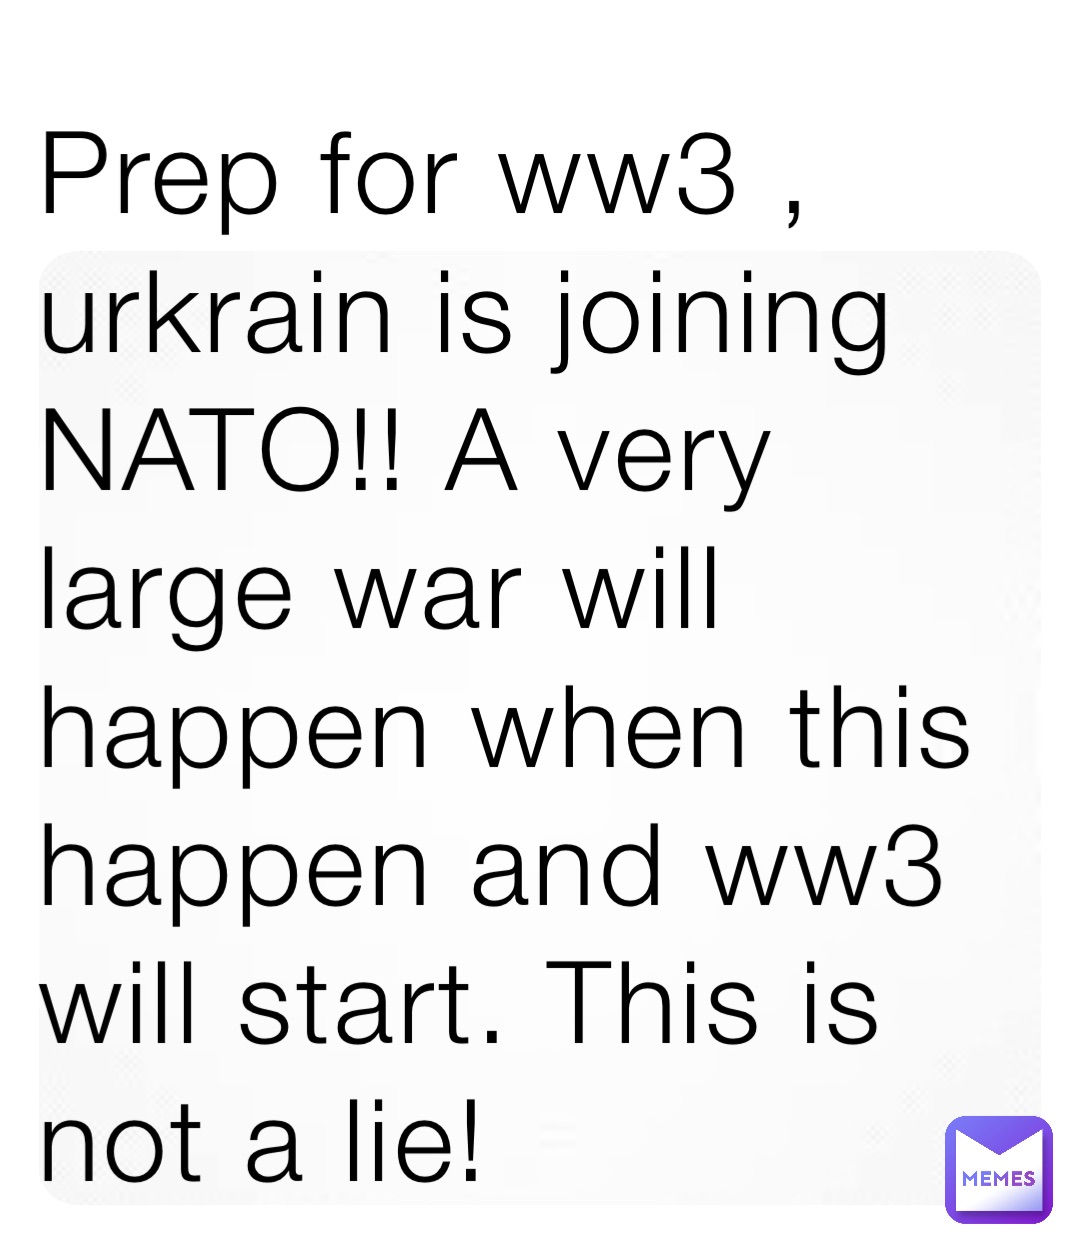 Prep for ww3 , urkrain is joining NATO!! A very large war will happen when this happen and ww3 will start. This is not a lie!